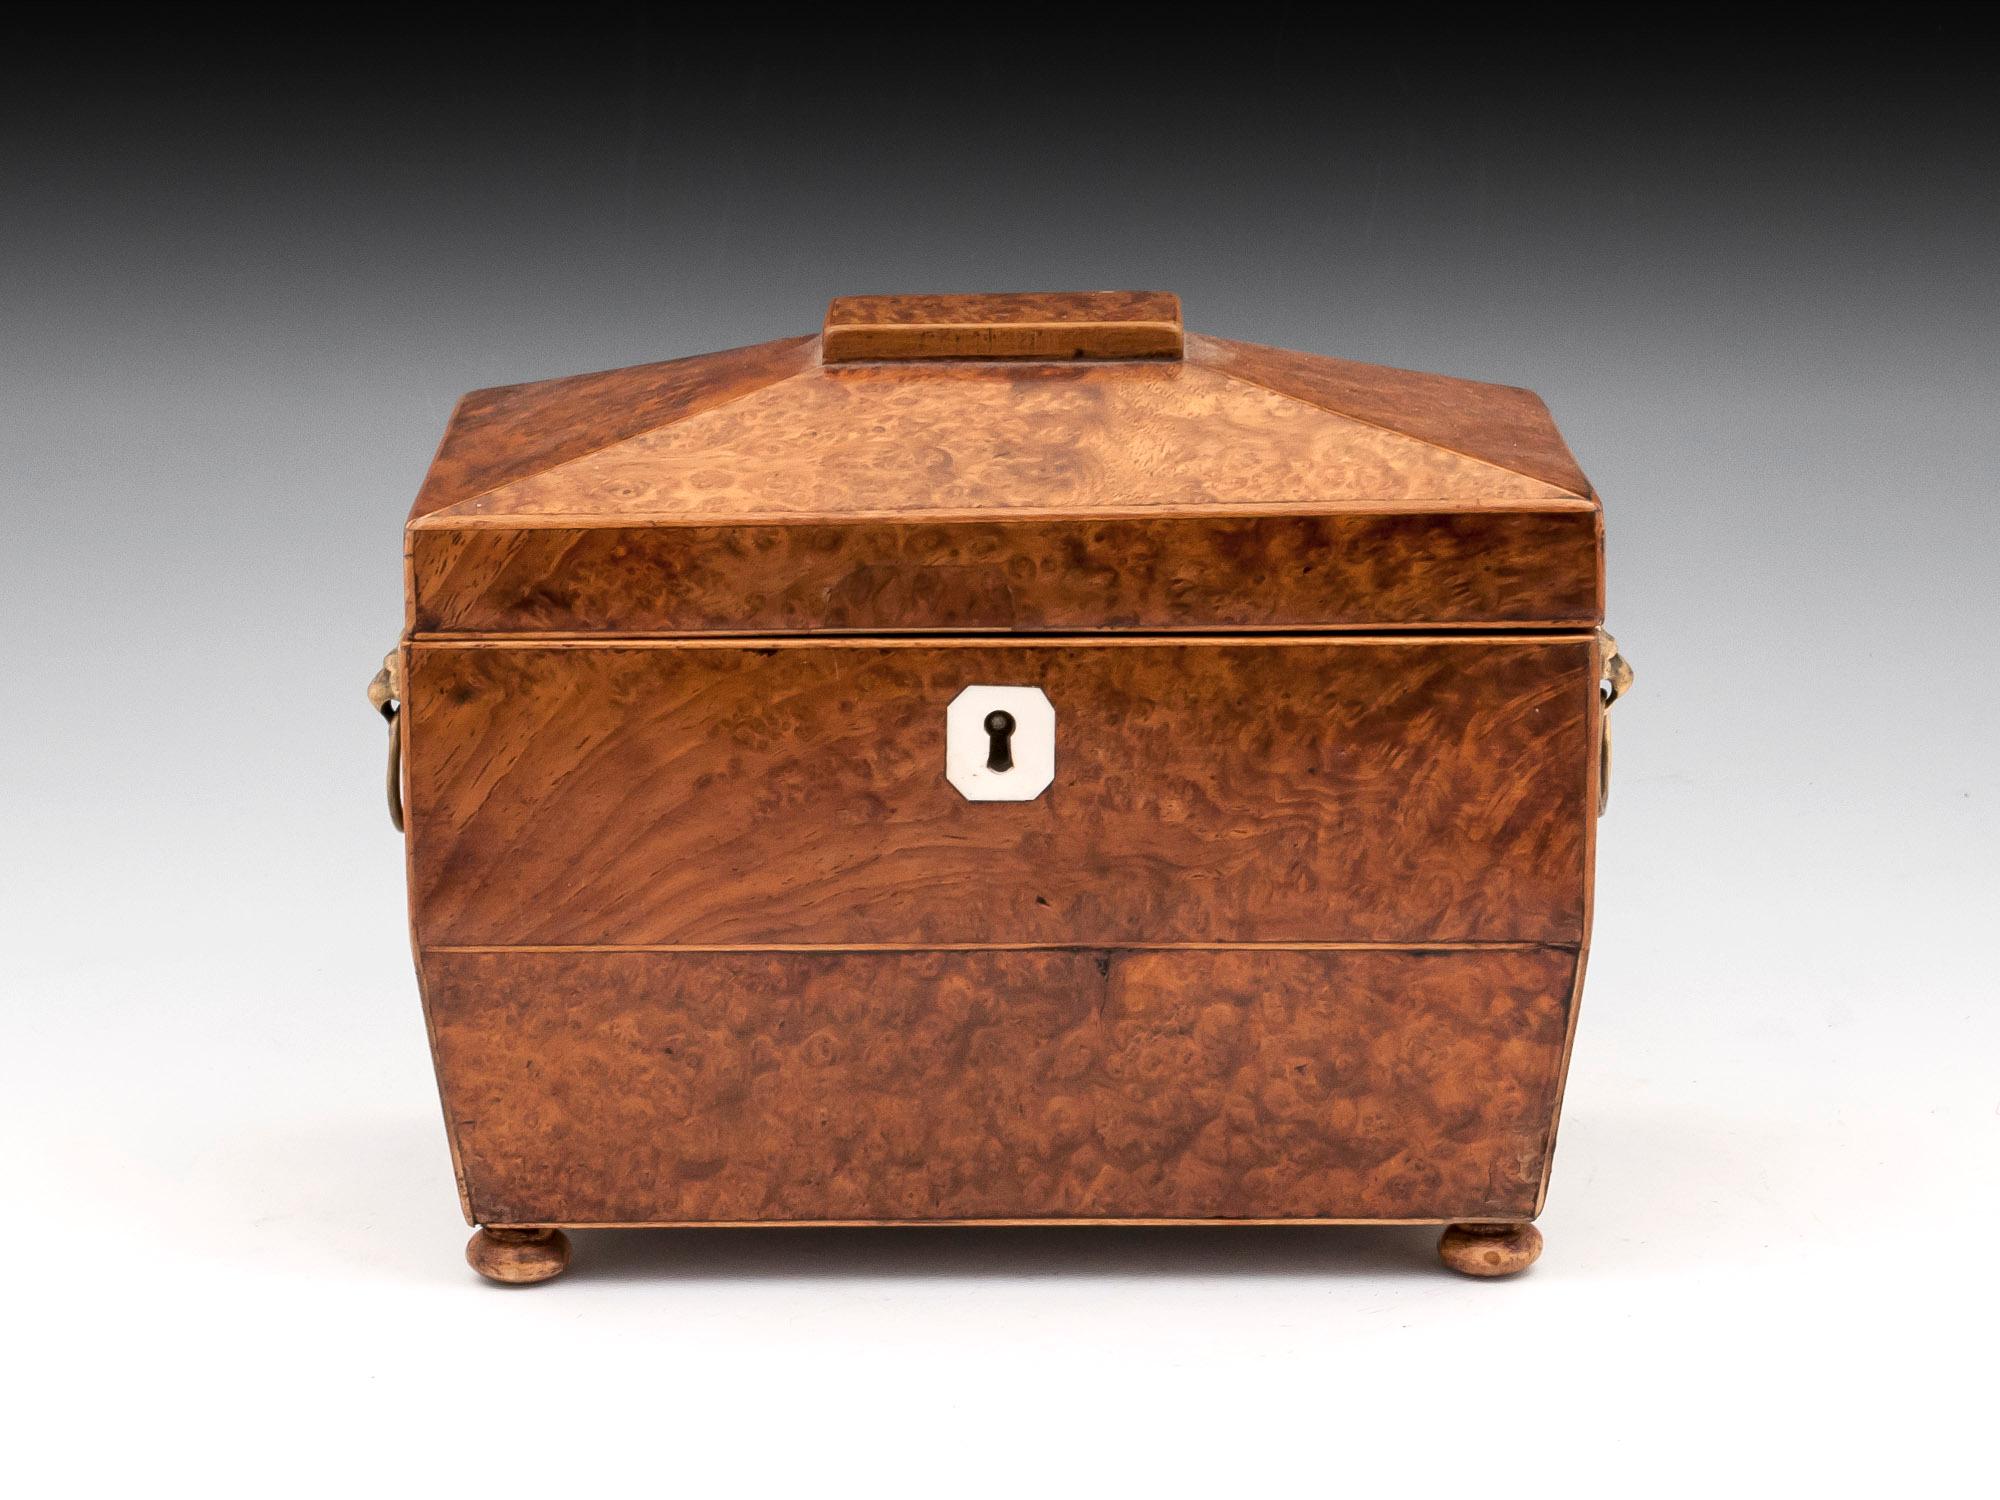 Amboyna sarcophagus tea caddy with bone escutcheon and brass lions head handles, standing on four turned wooden feet.

The interior contains two lidded compartments with bone handles.